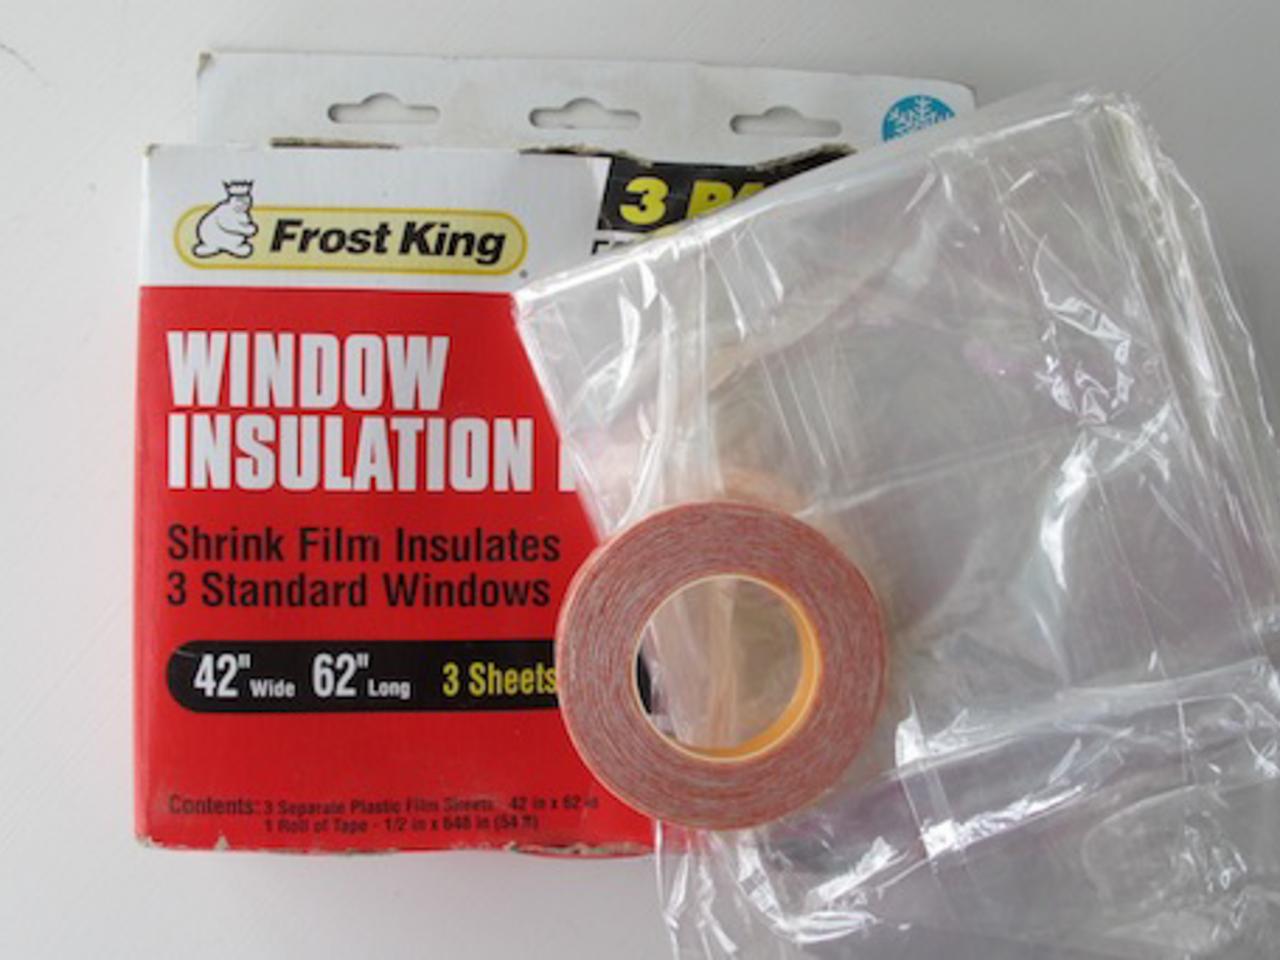 How do you seal windows for the winter?